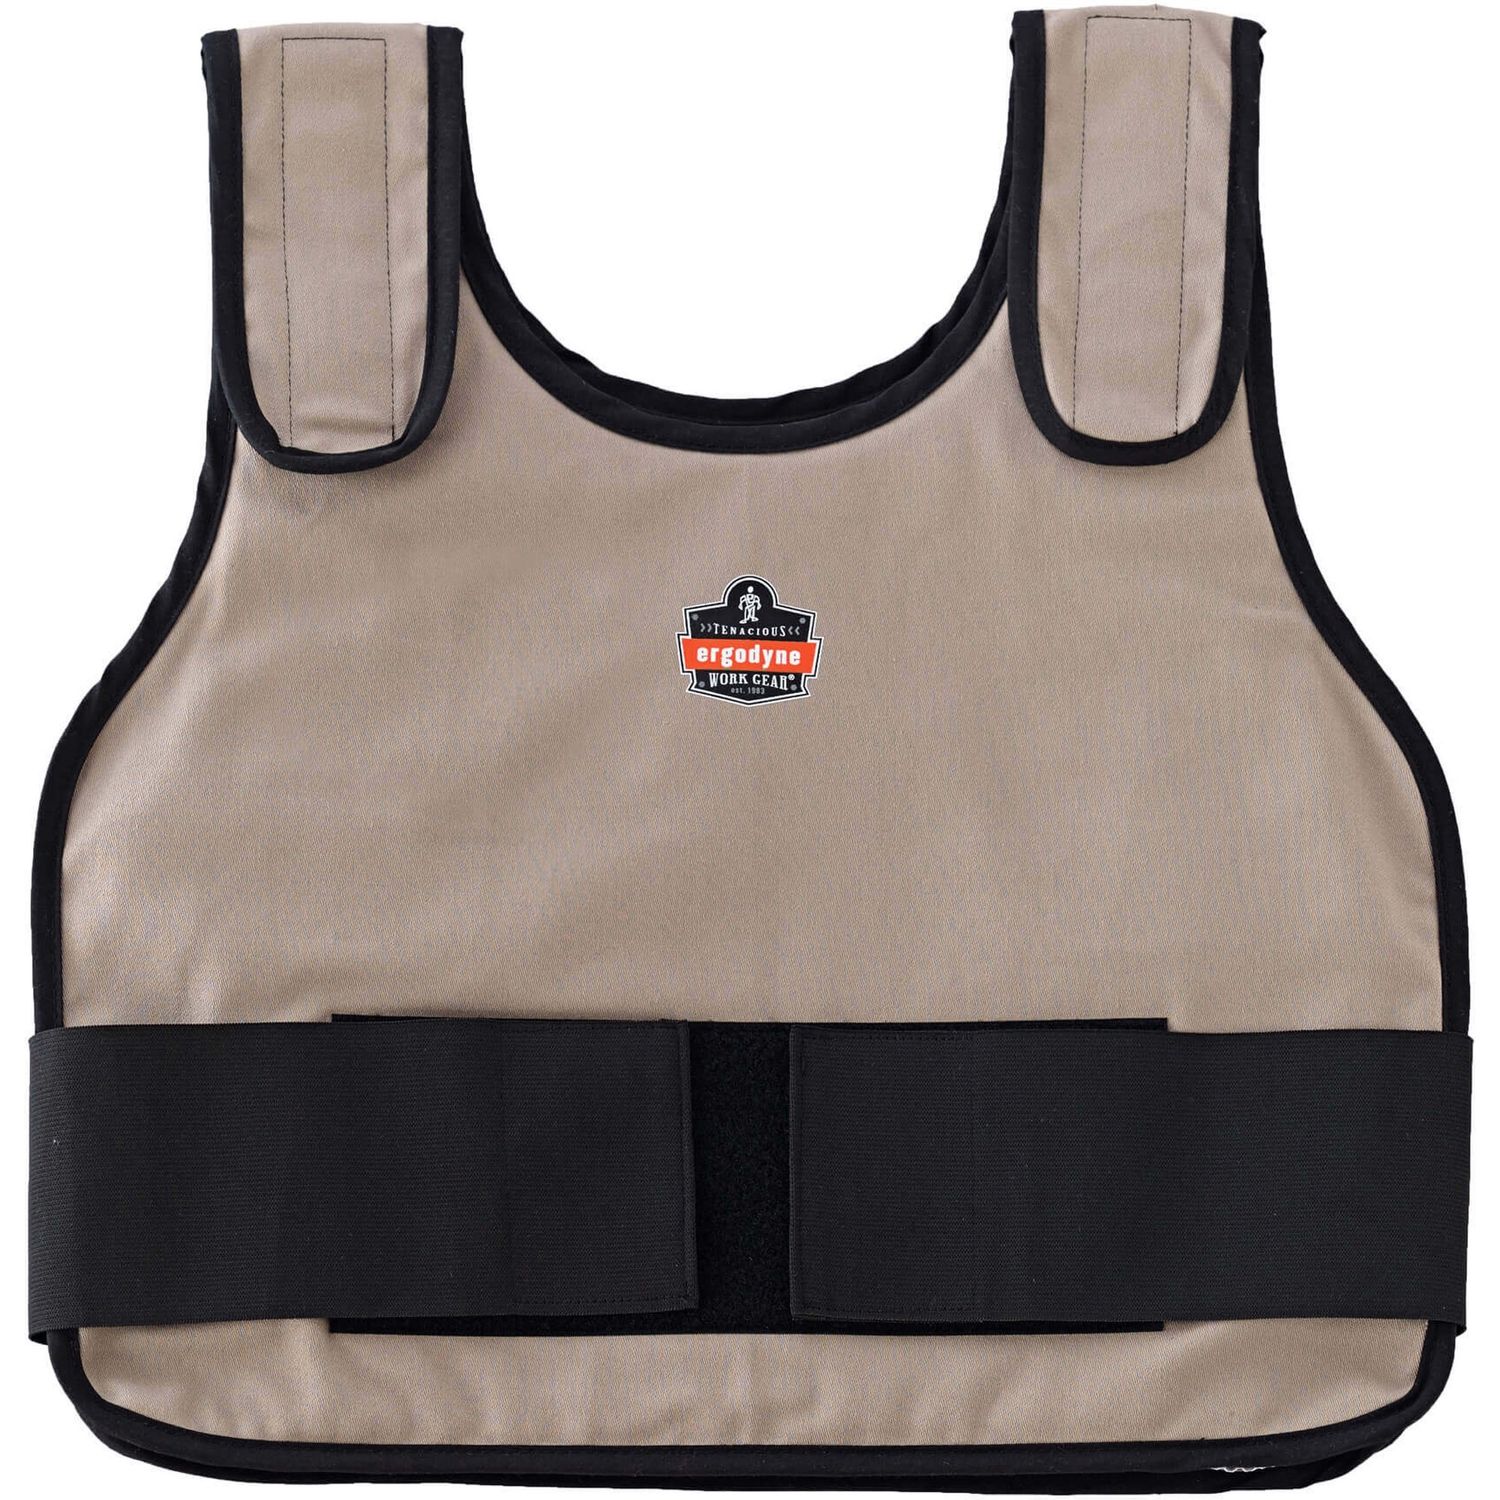 6235 Standard Cooling Vest Recommended for: Indoor, Outdoor, Adjustable, Comfortable, Long Lasting, Flexible, Small/Medium Size, Hook & Loop Closure, Cotton, Fabric, Khaki, 1 / Each